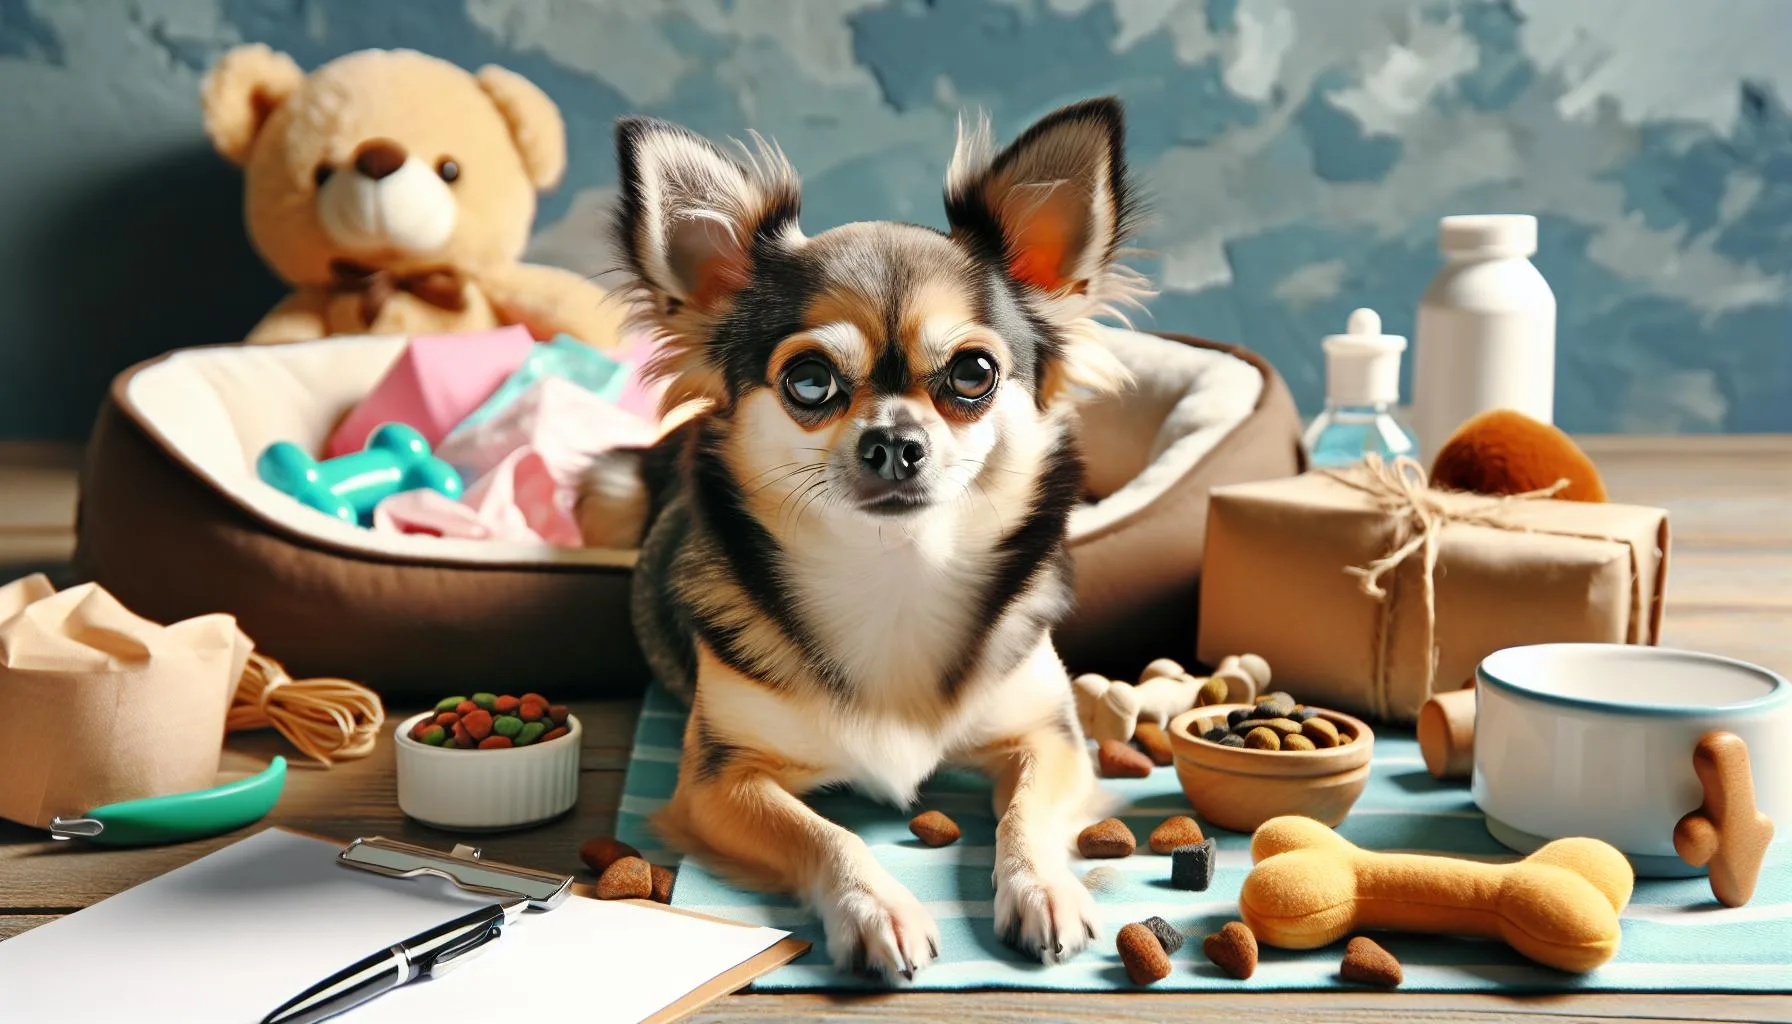 Dog with Squinty Eyes? Chihuahua Care Made Easy!